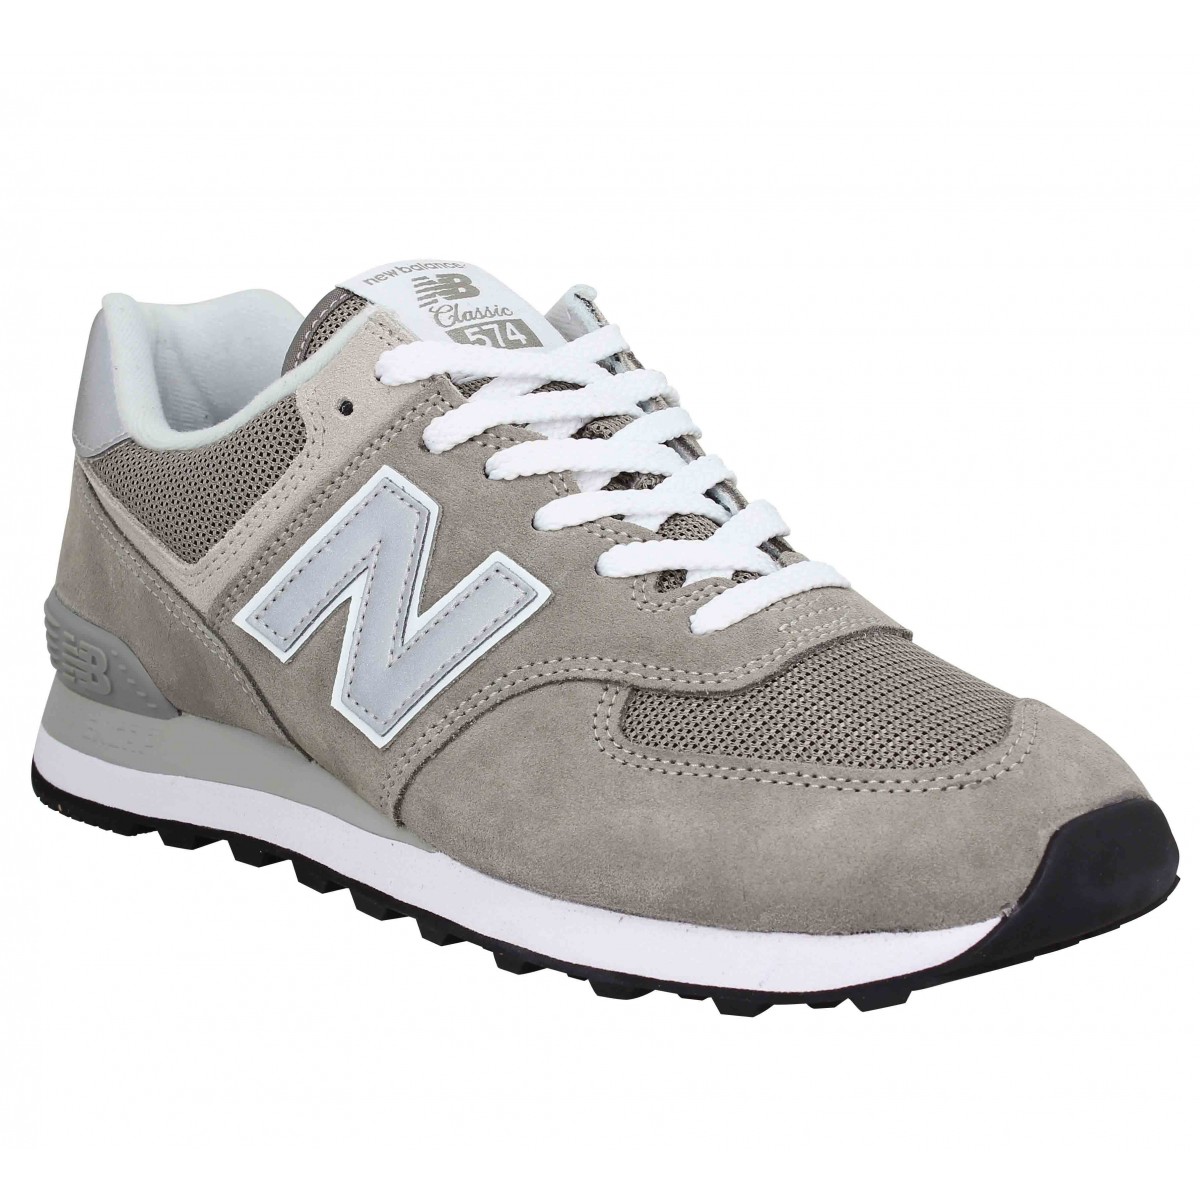 new balance 574 sport homme 2018 Cheaper Than Retail Price> Buy ...